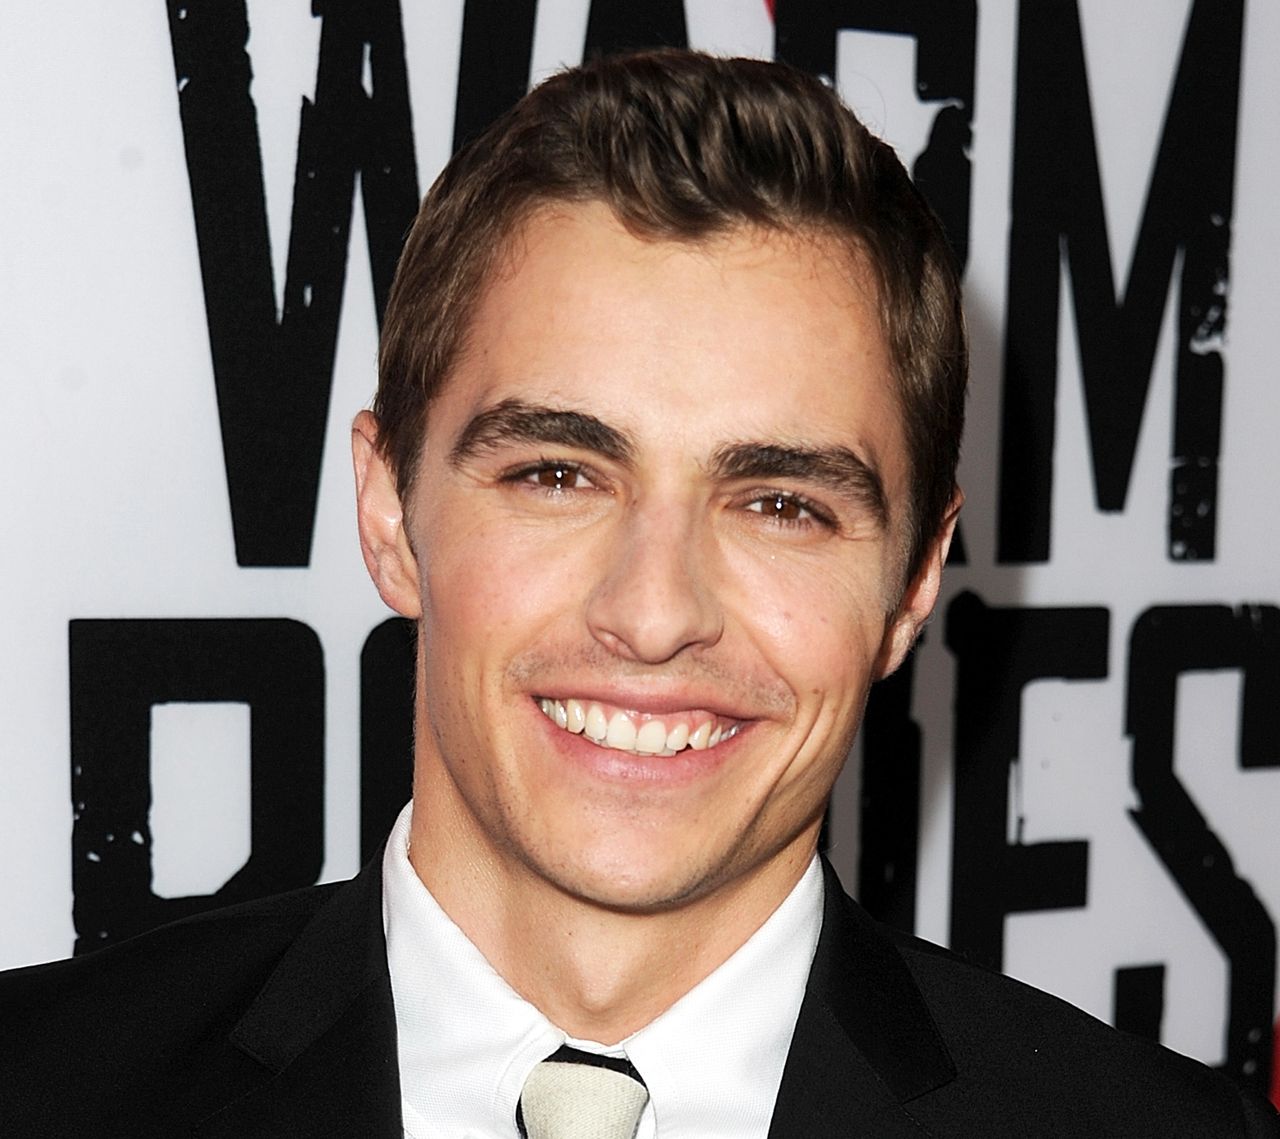 Dave Franco to feature in Sony’s The Intern's Handbook